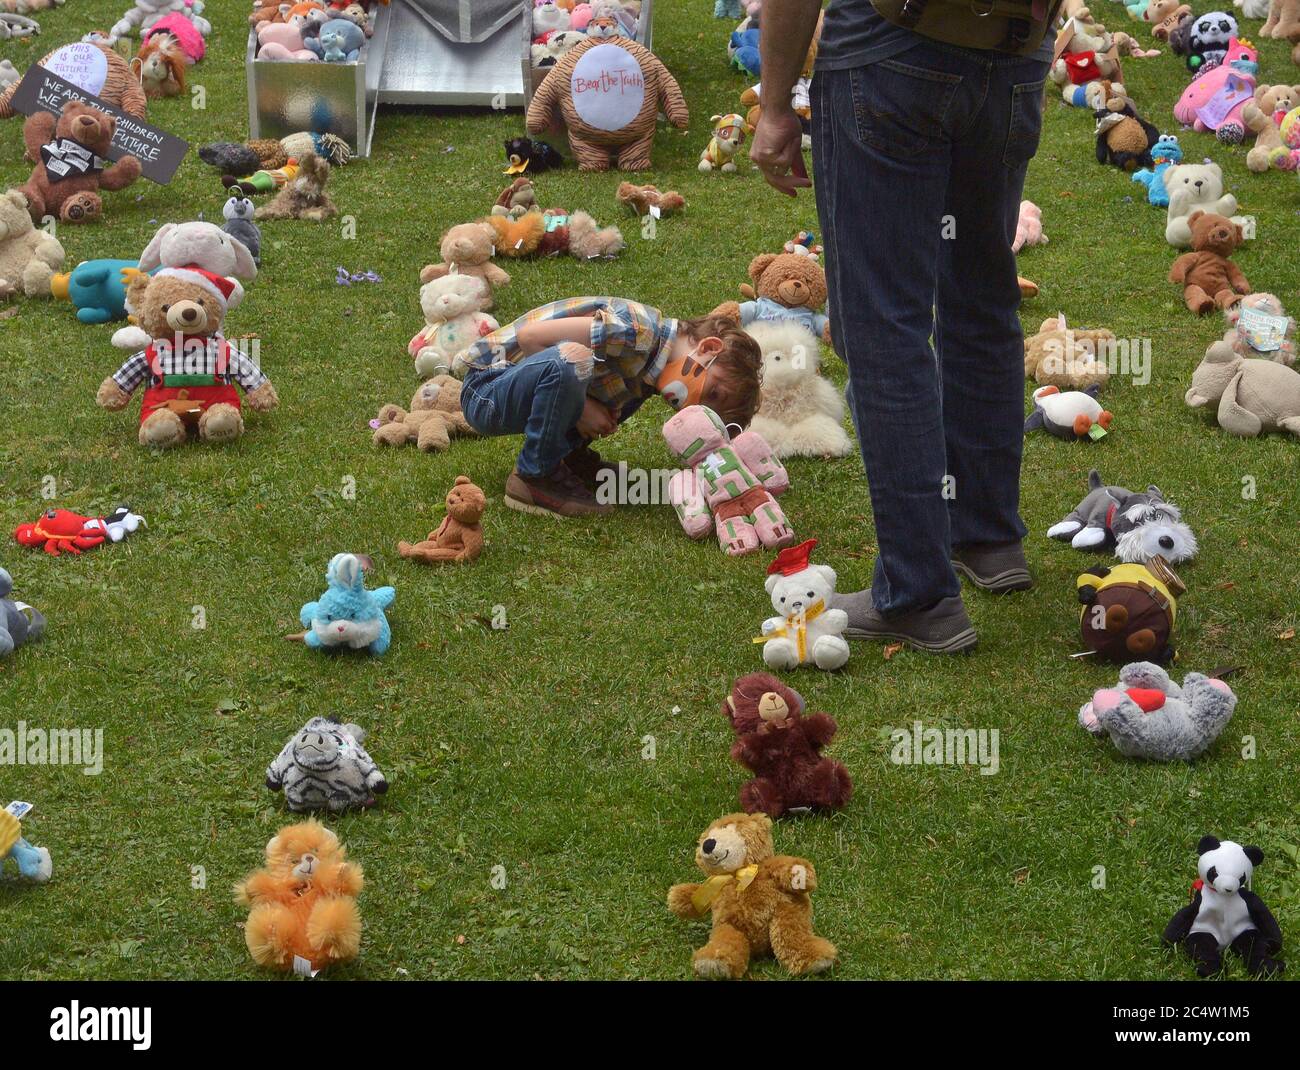 Los Angeles, United States. 29th June, 2020. A young boy and his father look over display of teddy bears with the message, 'we deserve a future free of racial injustice' in Los Angeles on Sunday, June 28, 2020. Demonstrations and other activities across the nation, targeting systemic racism and police brutality have entered a second month with no signs of waning. Photo by Jim Ruymen/UPI Credit: UPI/Alamy Live News Stock Photo